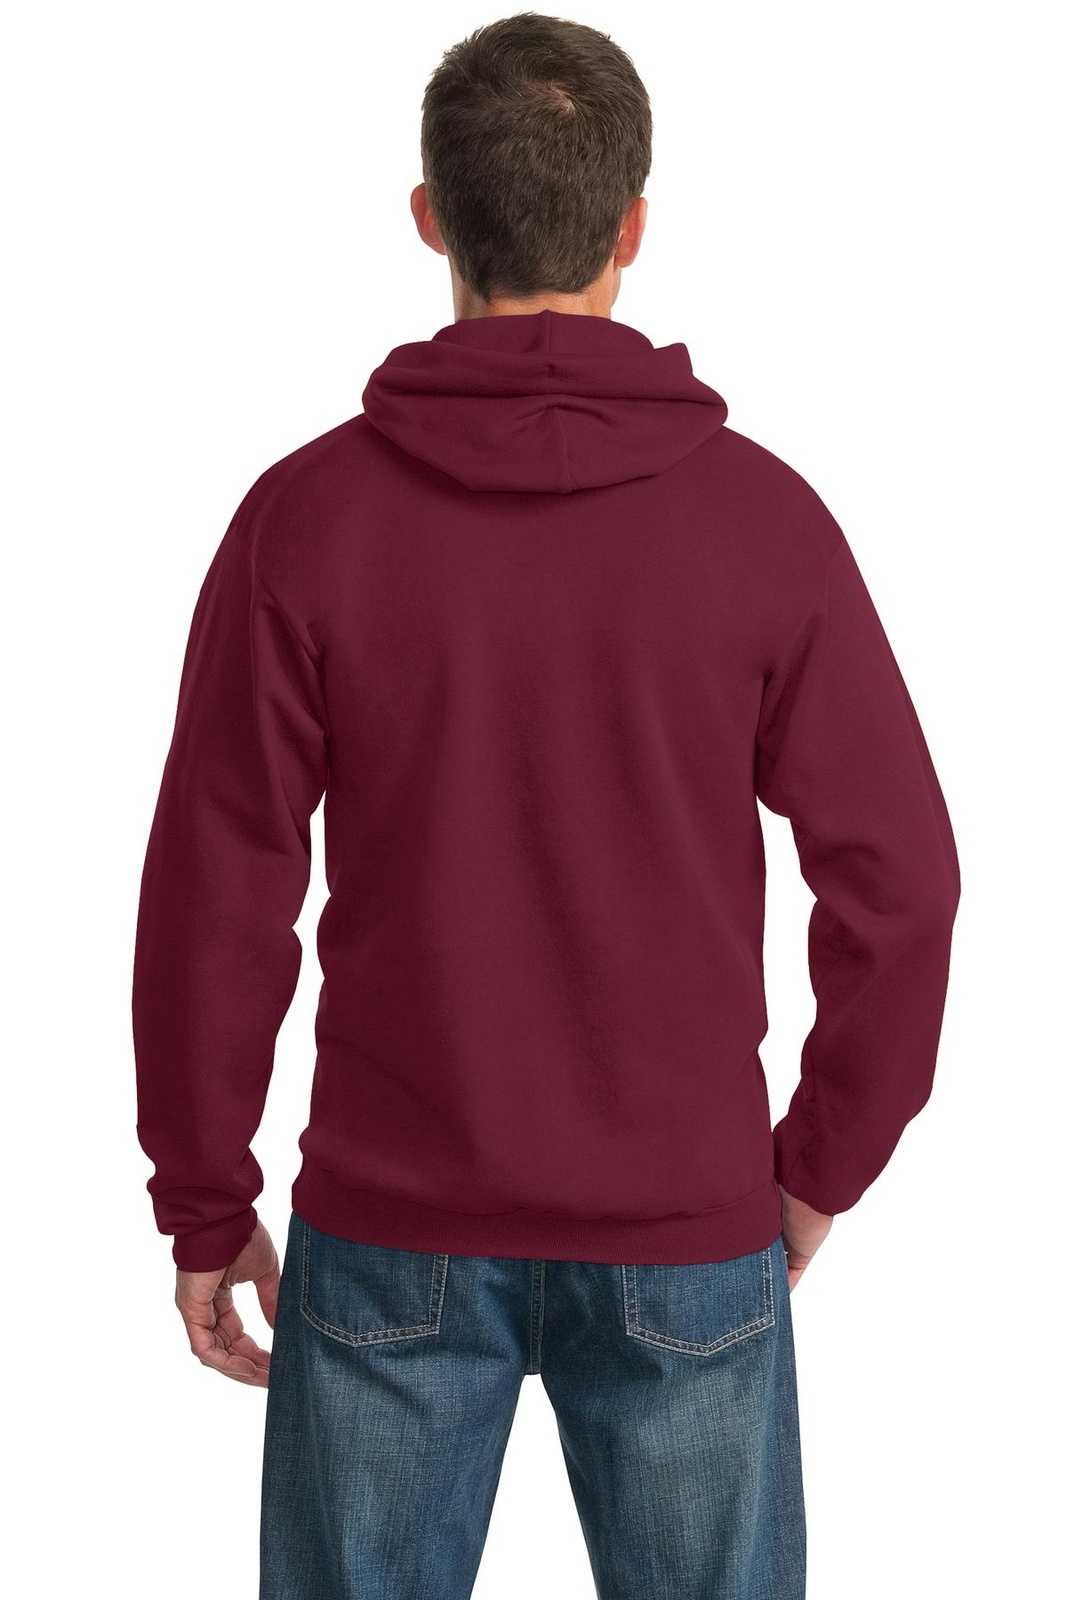 Port &amp; Company PC90H Essential Fleece Pullover Hooded Sweatshirt - Cardinal - HIT a Double - 2